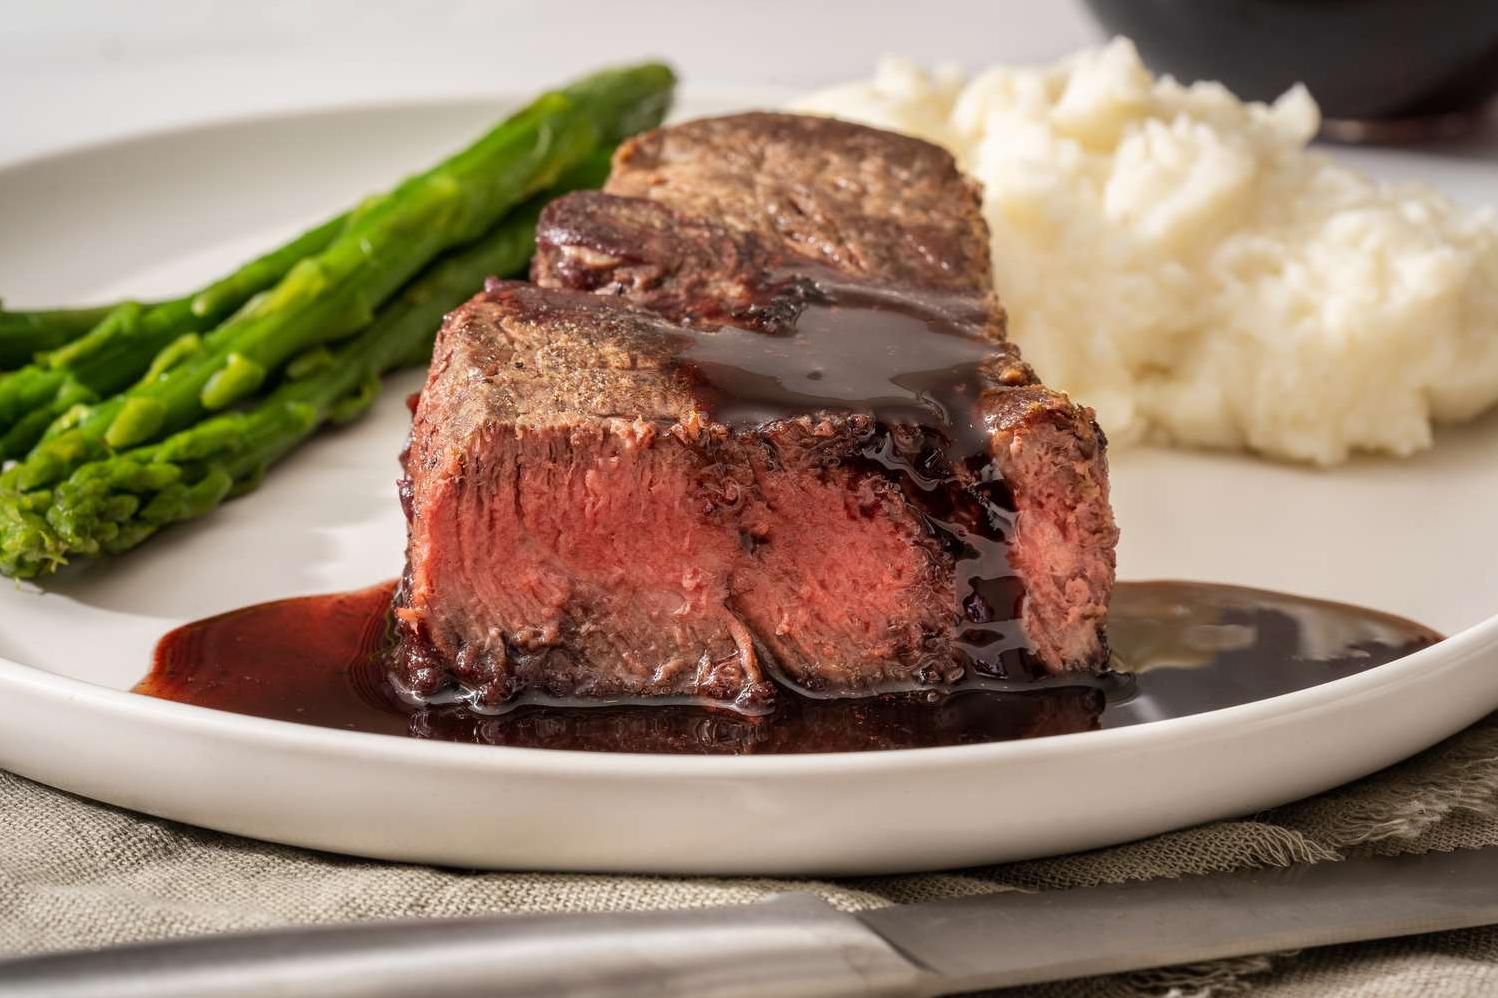  Indulge in the velvety texture of the meat, and the richness of the sauce.